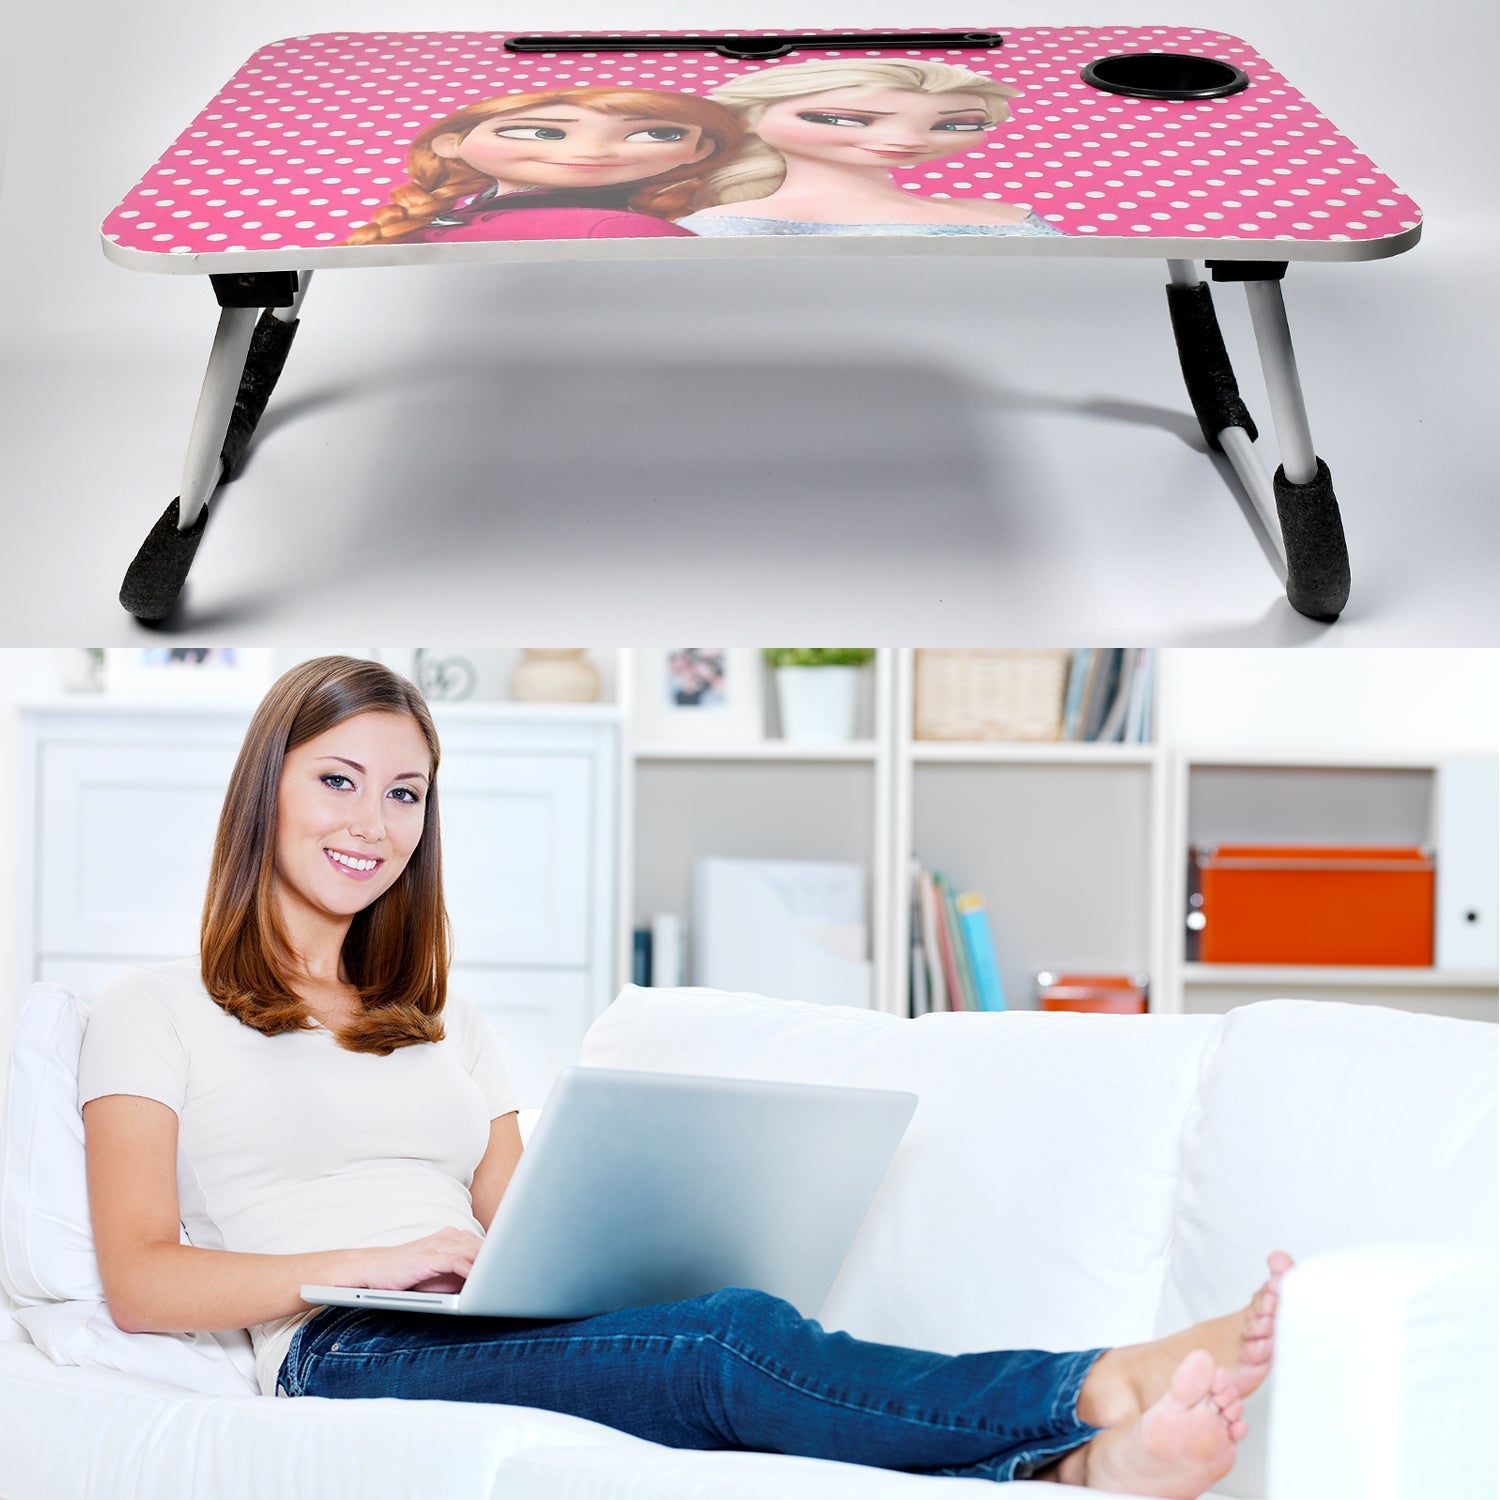 7694 Barbie Design Foldable Bed Study Table Portable Multifunction Laptop Table Lapdesk for Children Bed Foldable Table Work Office Home with Tablet Slot & Cup Holder DeoDap